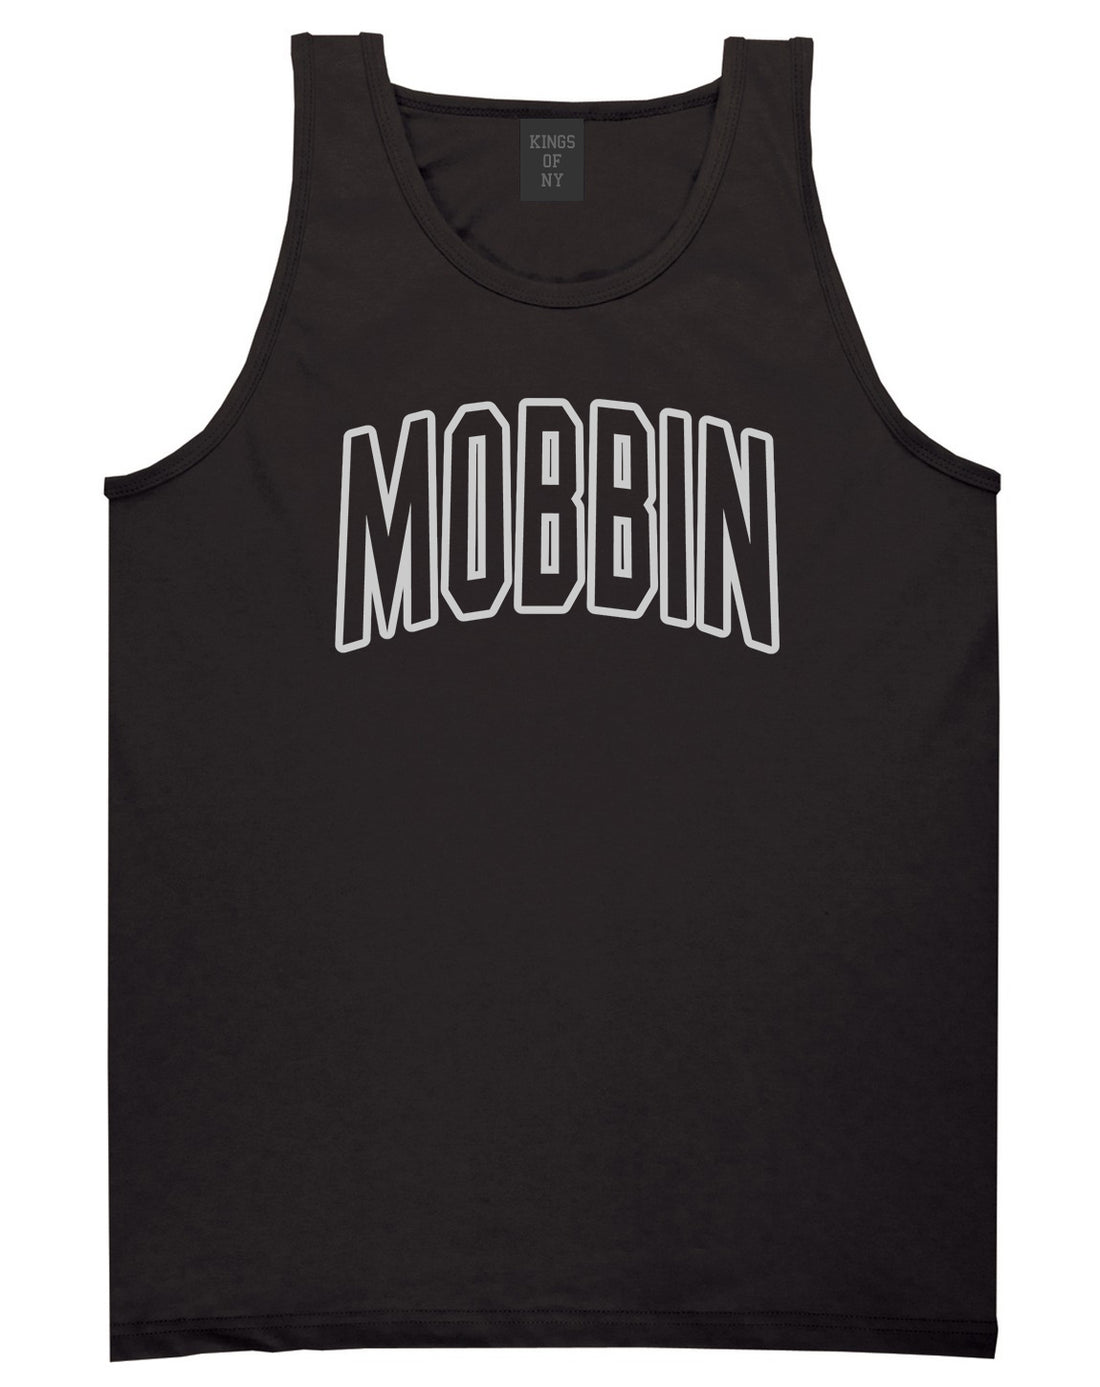 Mobbin Outline Squad Mens Tank Top Shirt Black by Kings Of NY